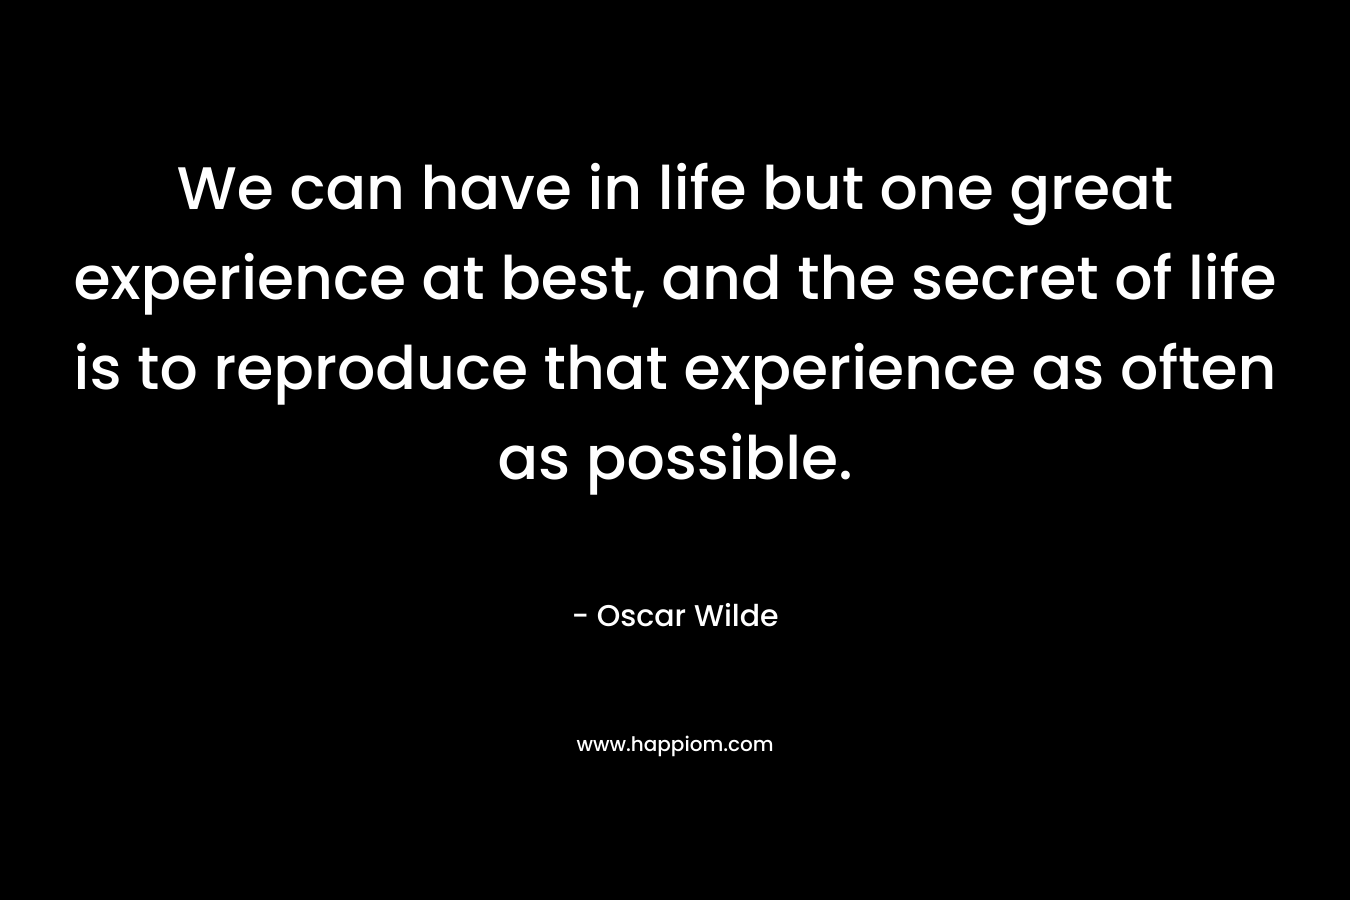 We can have in life but one great experience at best, and the secret of life is to reproduce that experience as often as possible.